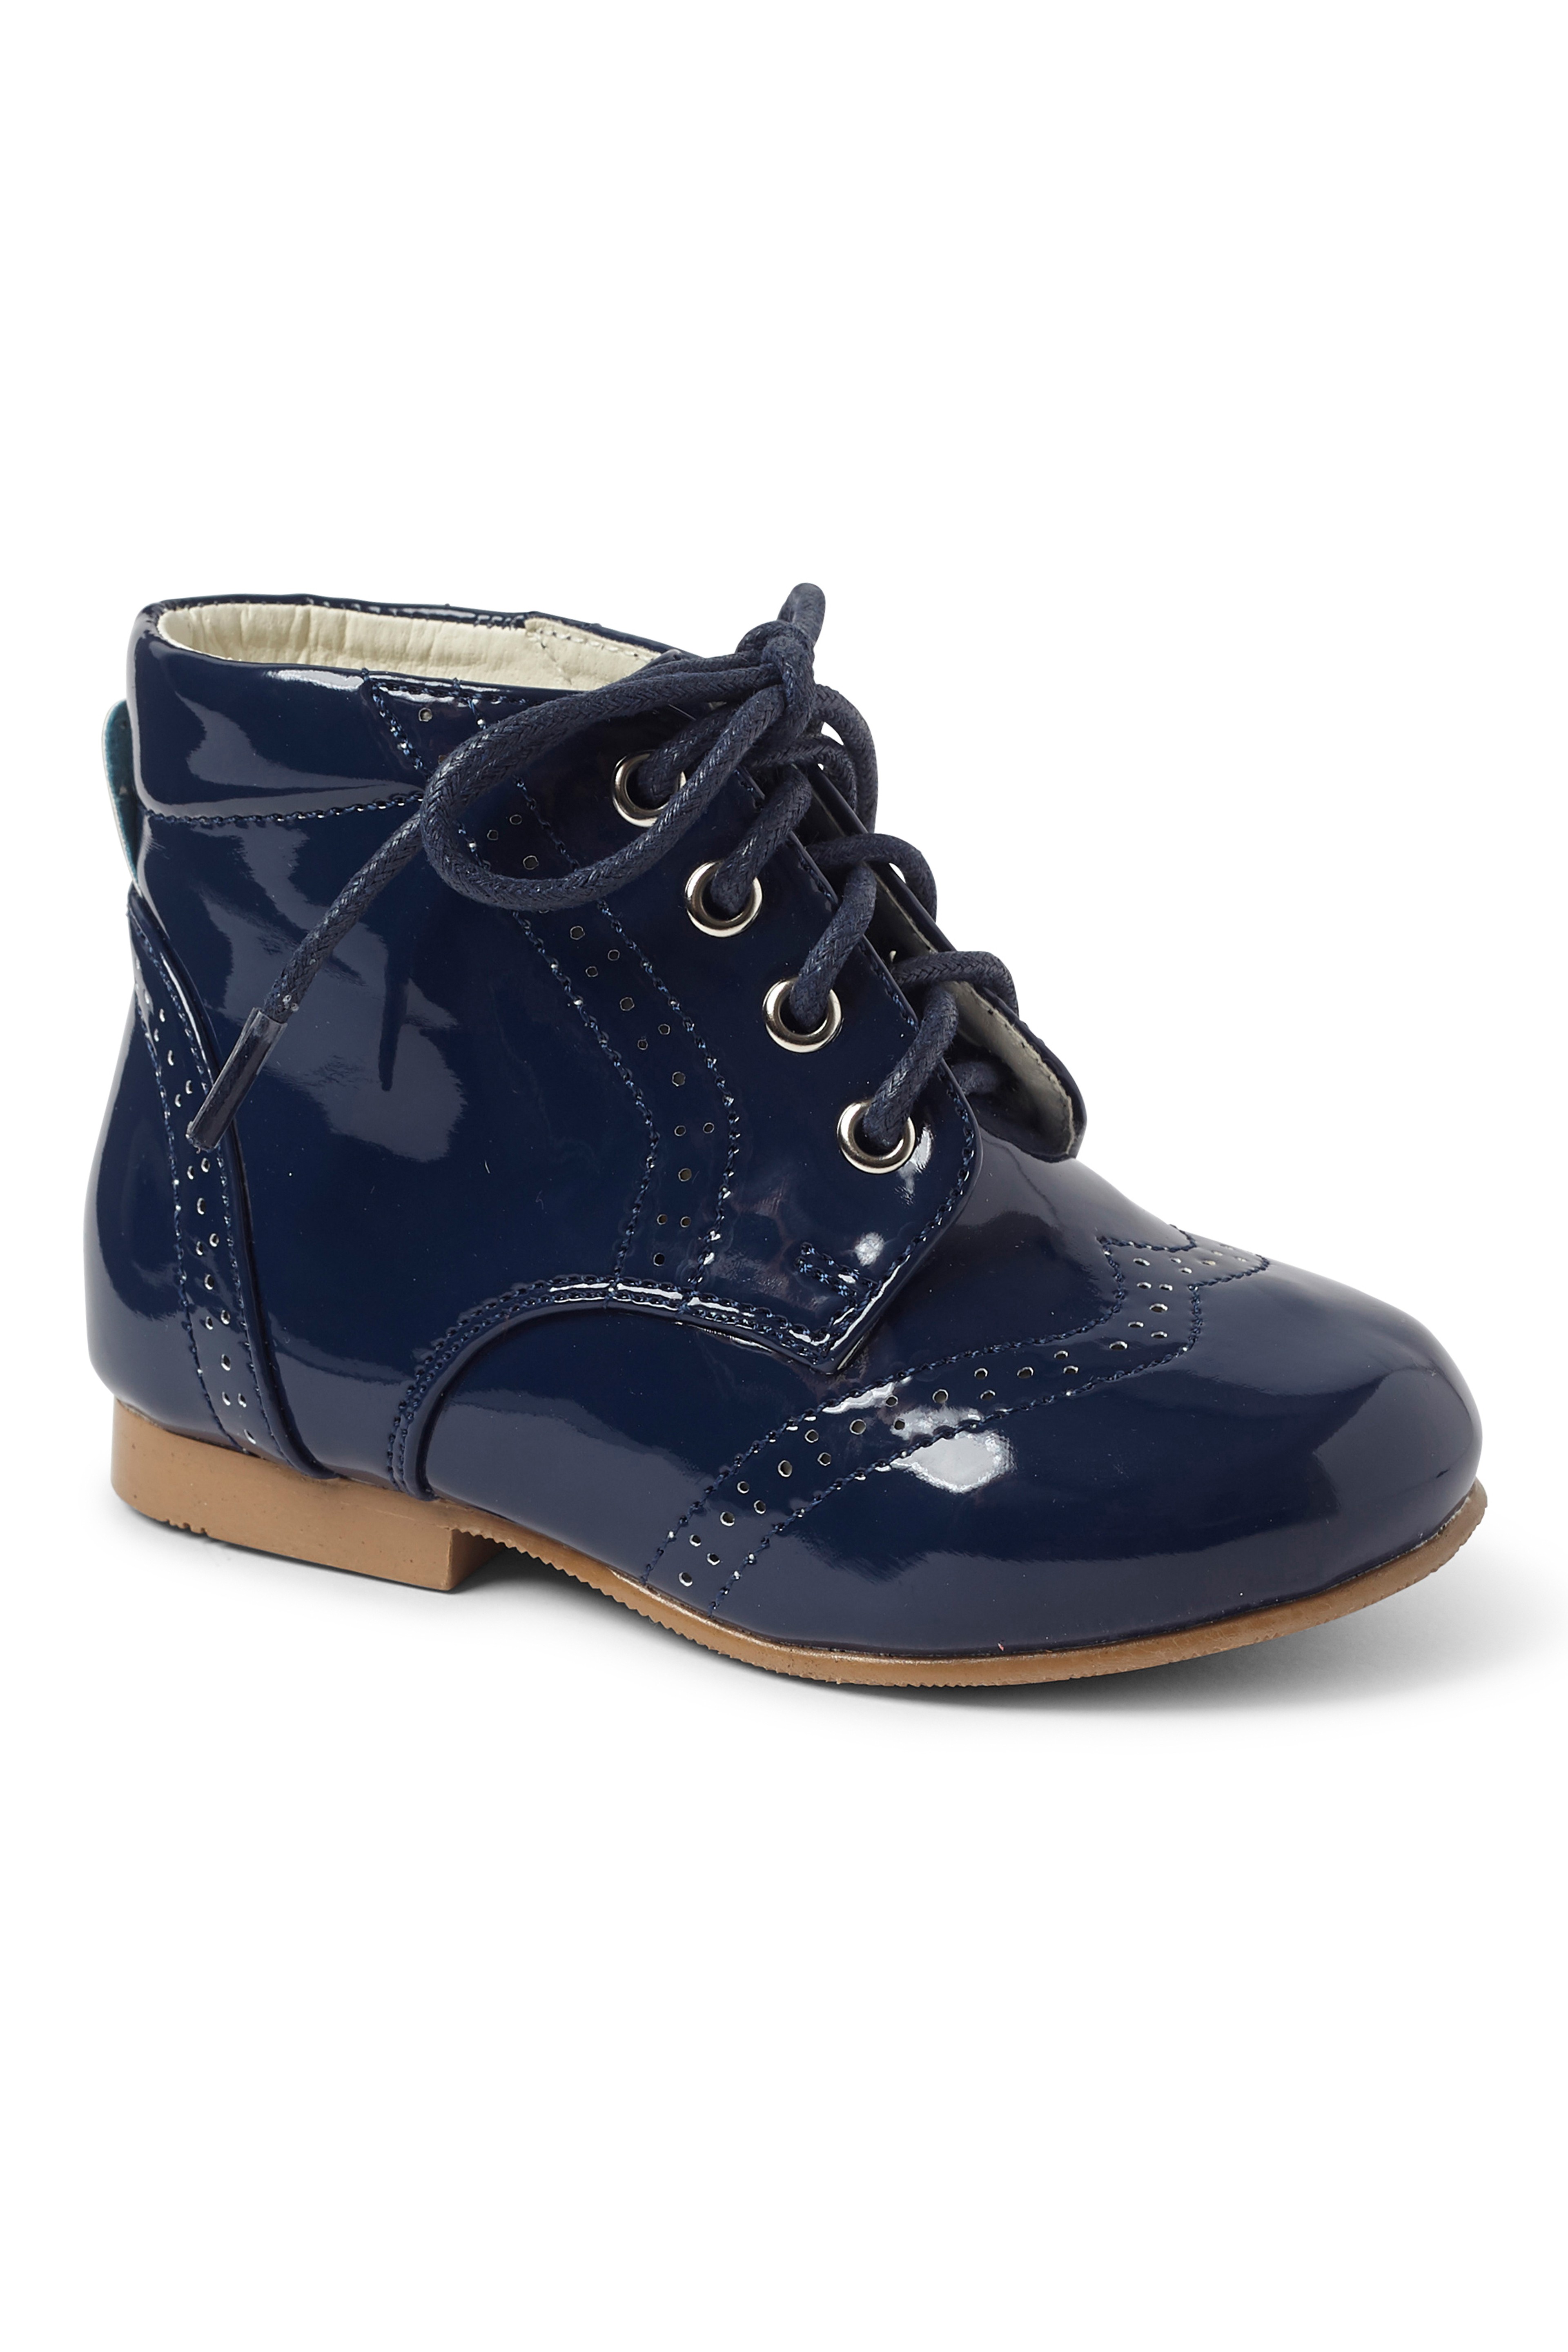 Unisex Kids Patent Leather Brogue Ankle Boots - QUINN  - Navy Blue